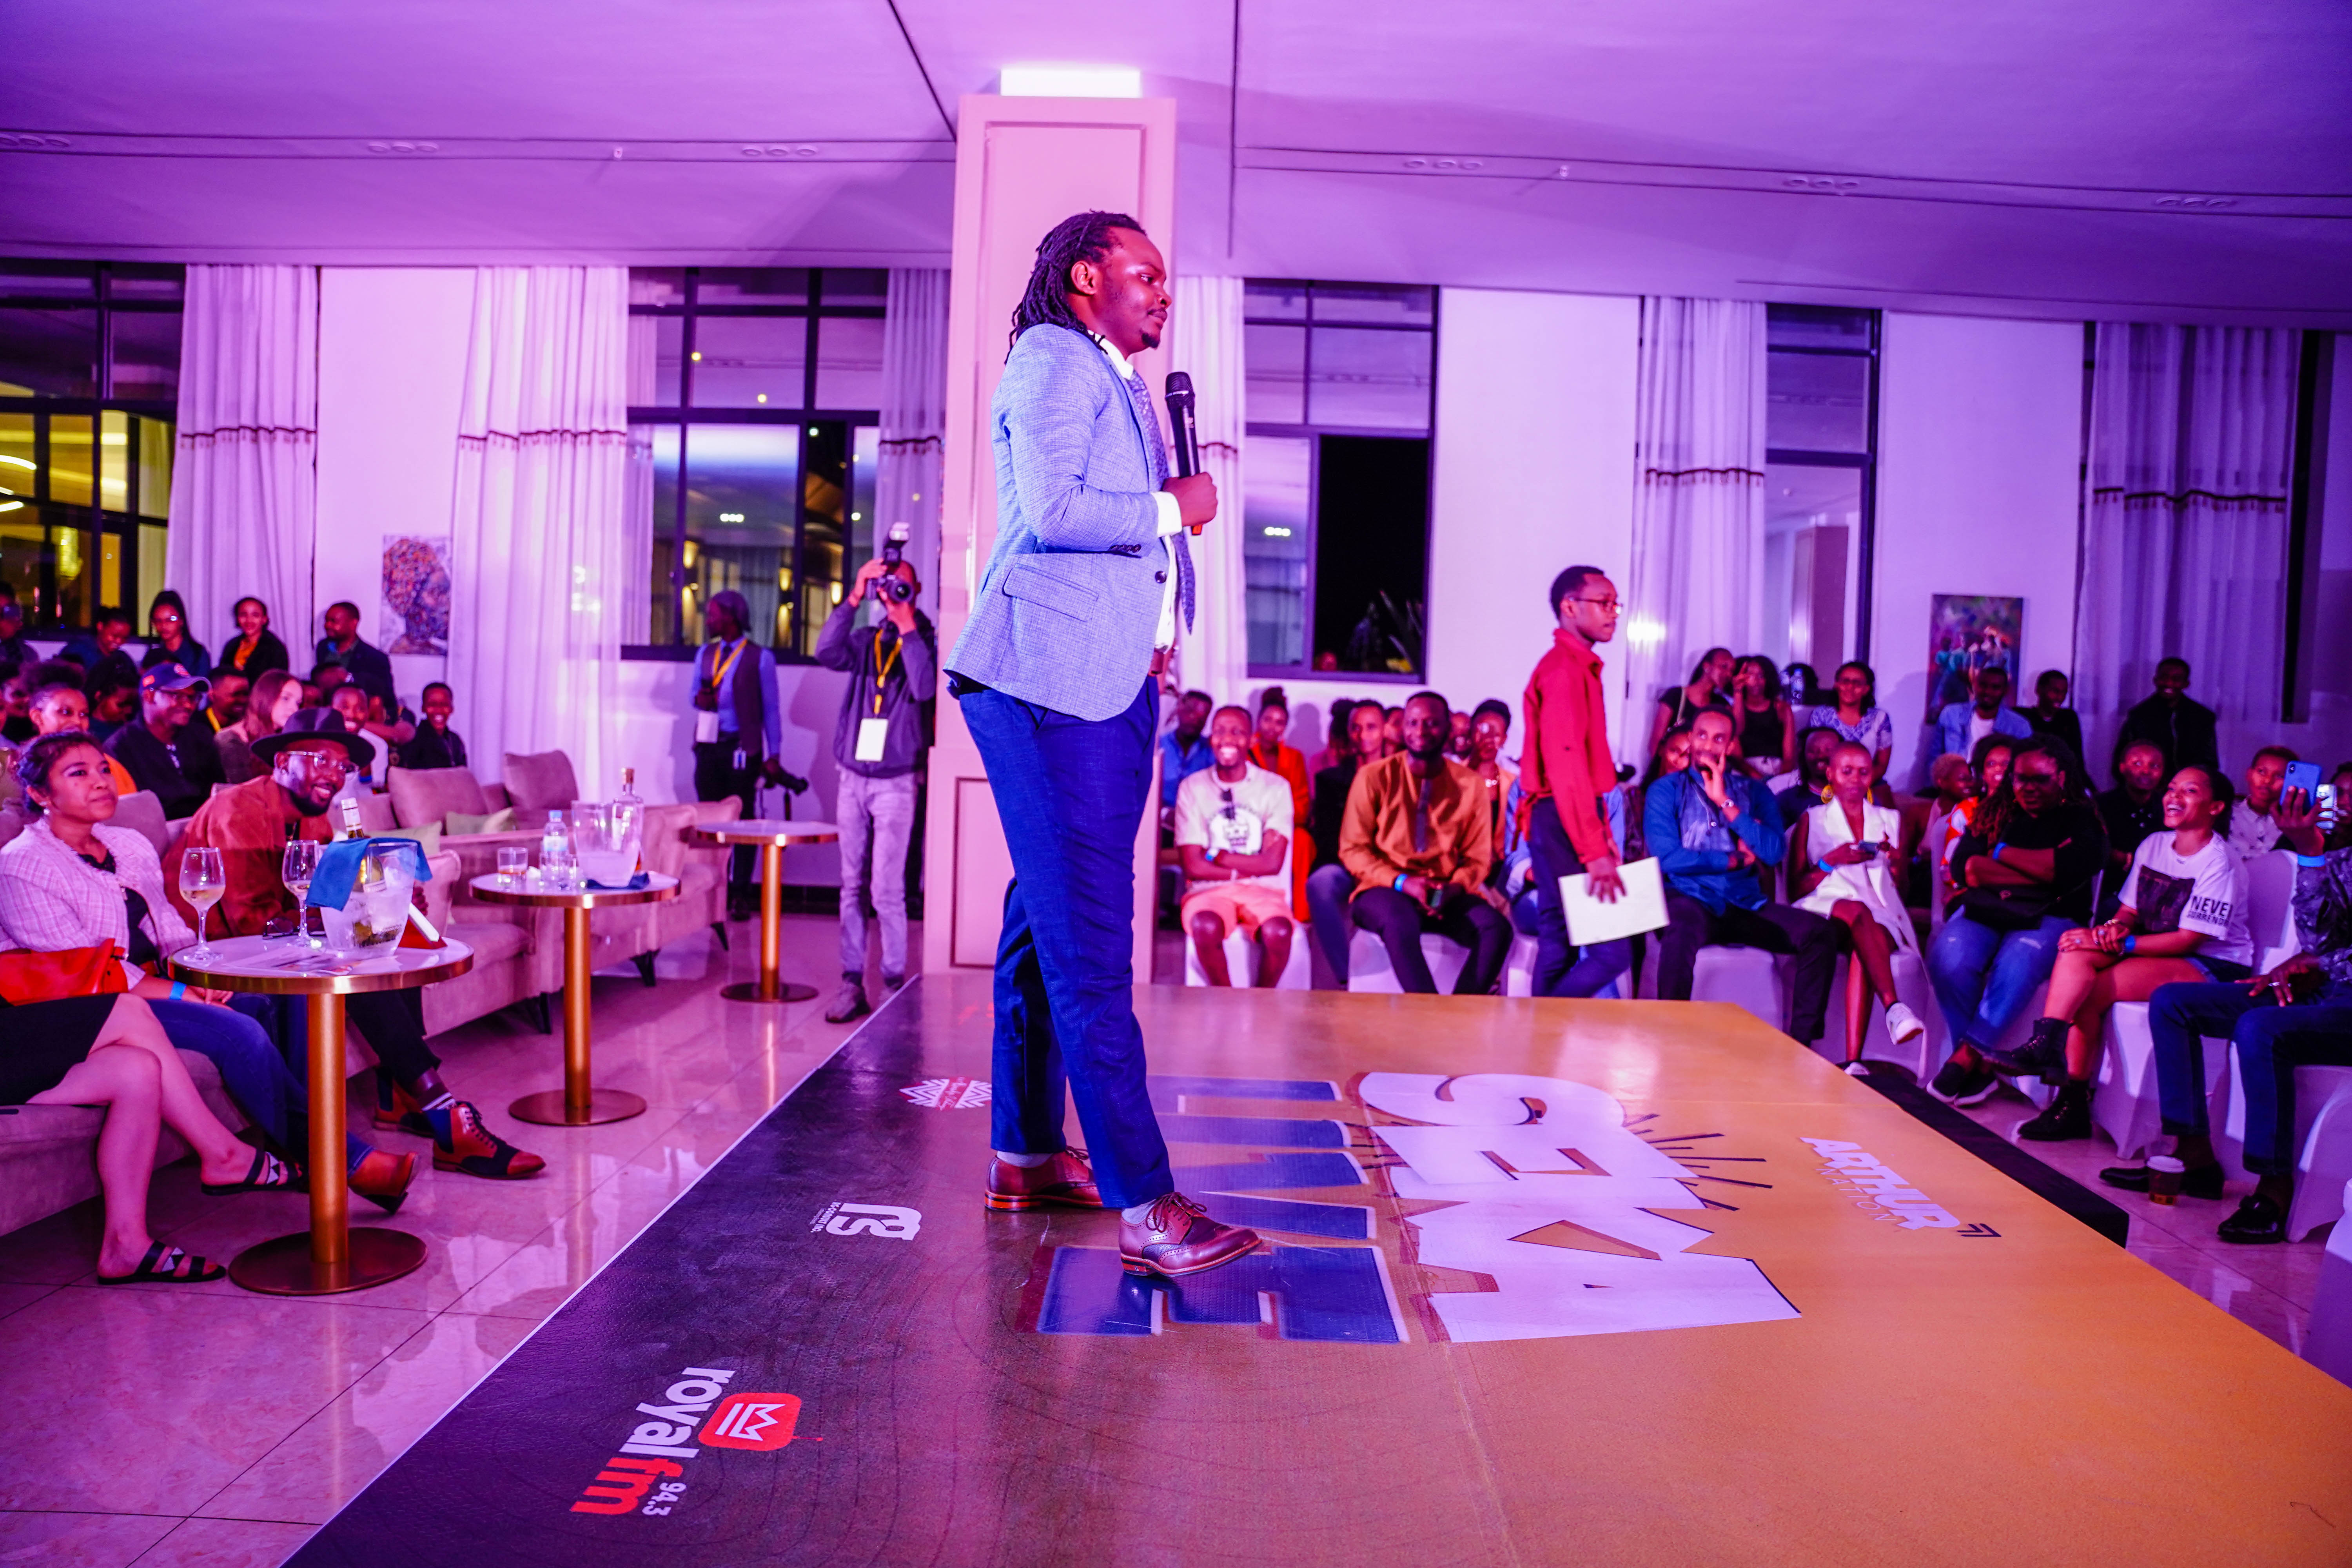 Patrick Rusine, local comedian, changes the mood for those who attended Seka Live when he stepped onto the stage on May 29, 2022. 